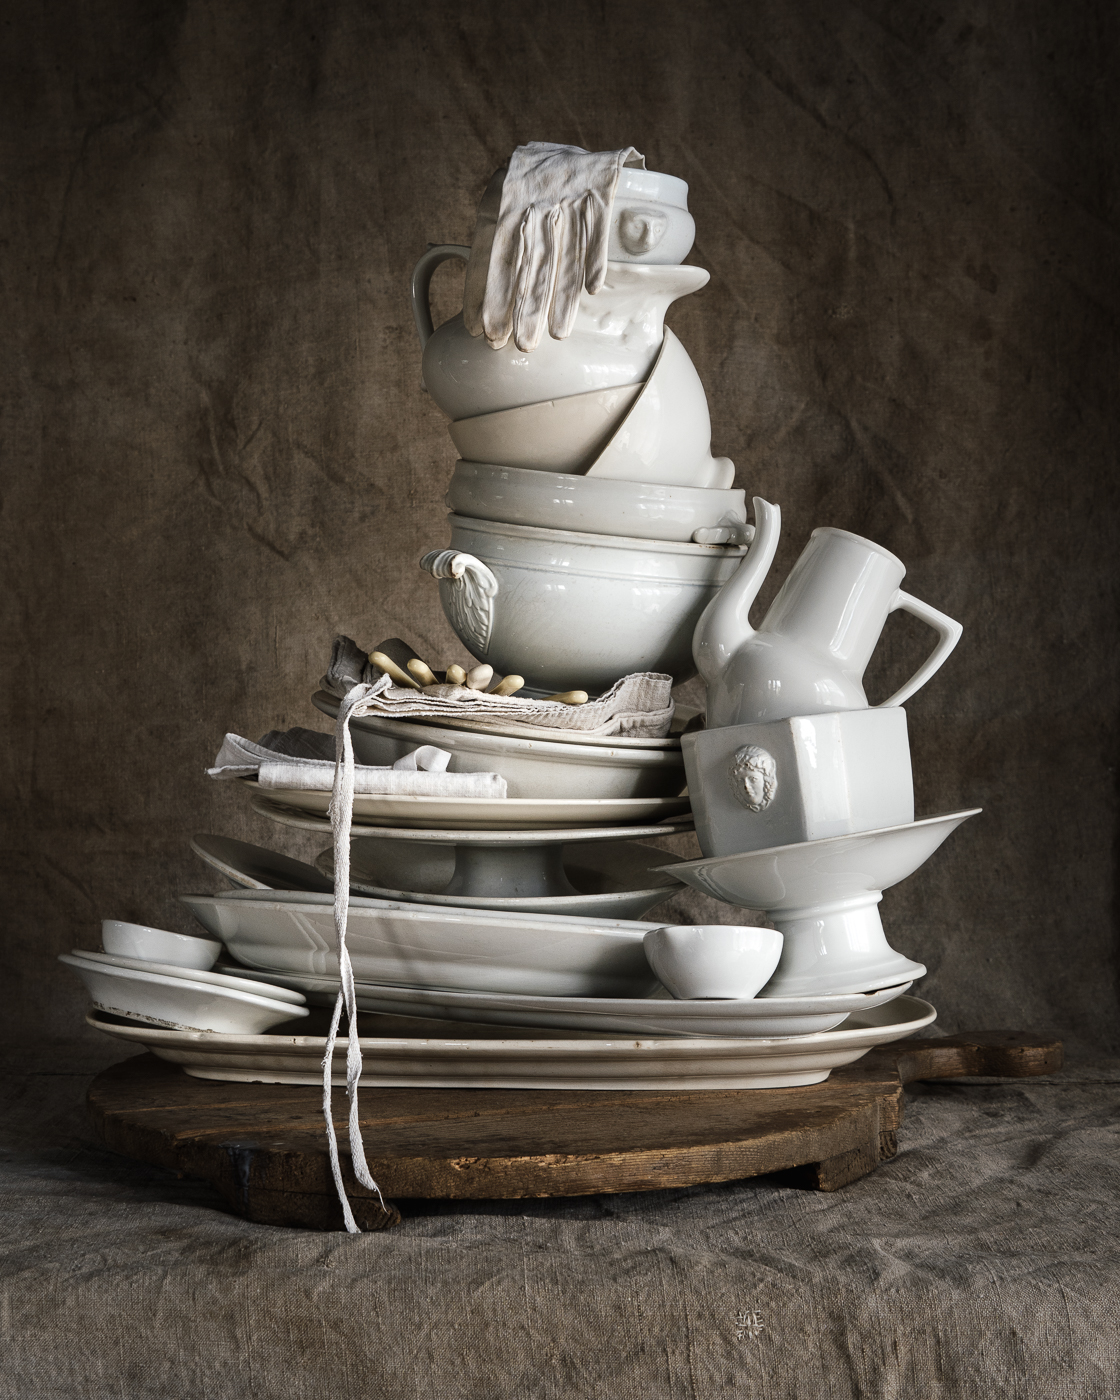 A tall pile of white ceramics sits on a table